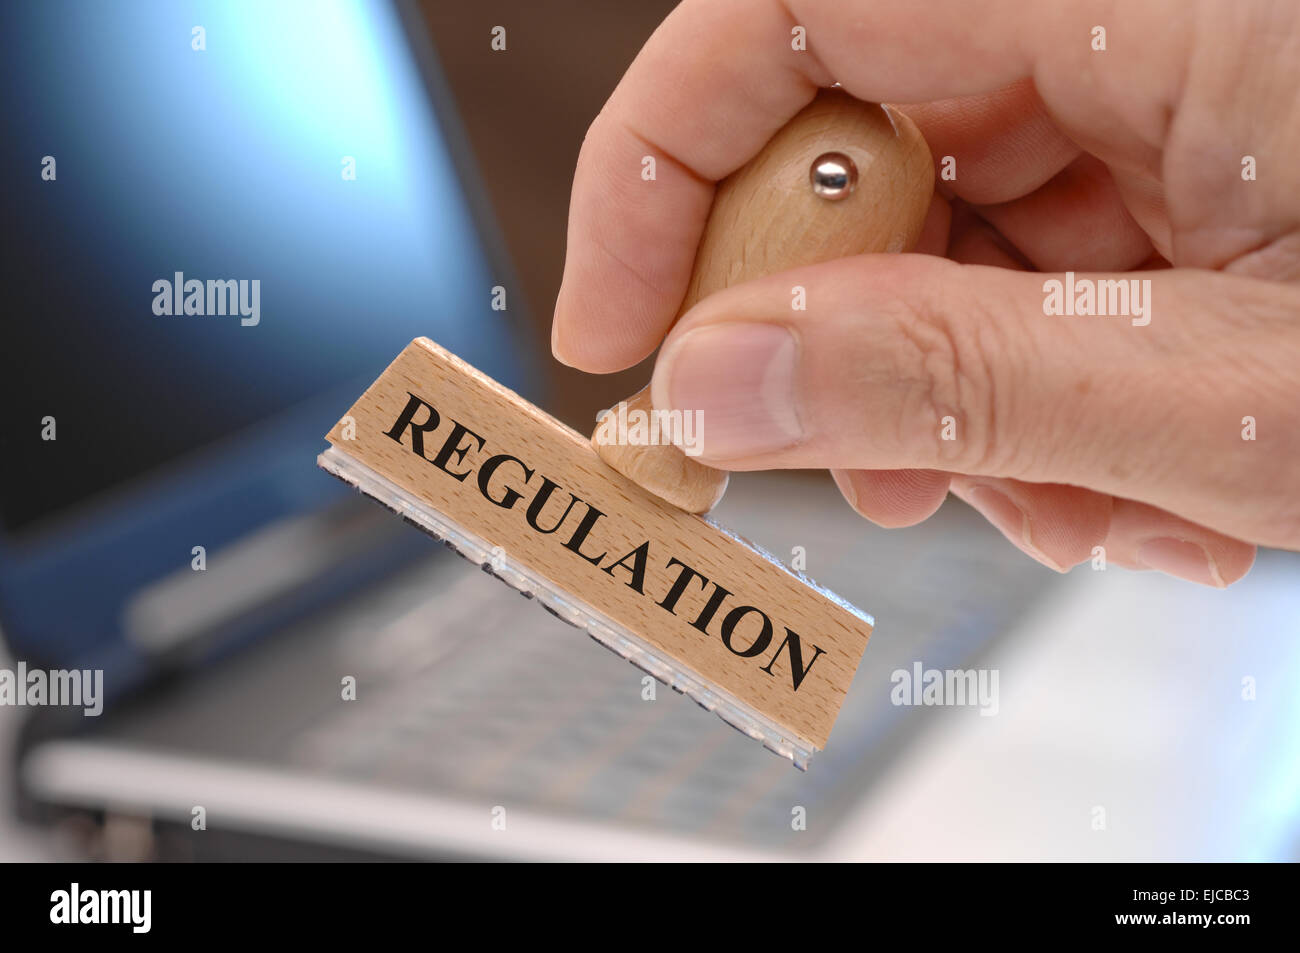 regulations marked on rubber stamp in hand Stock Photo